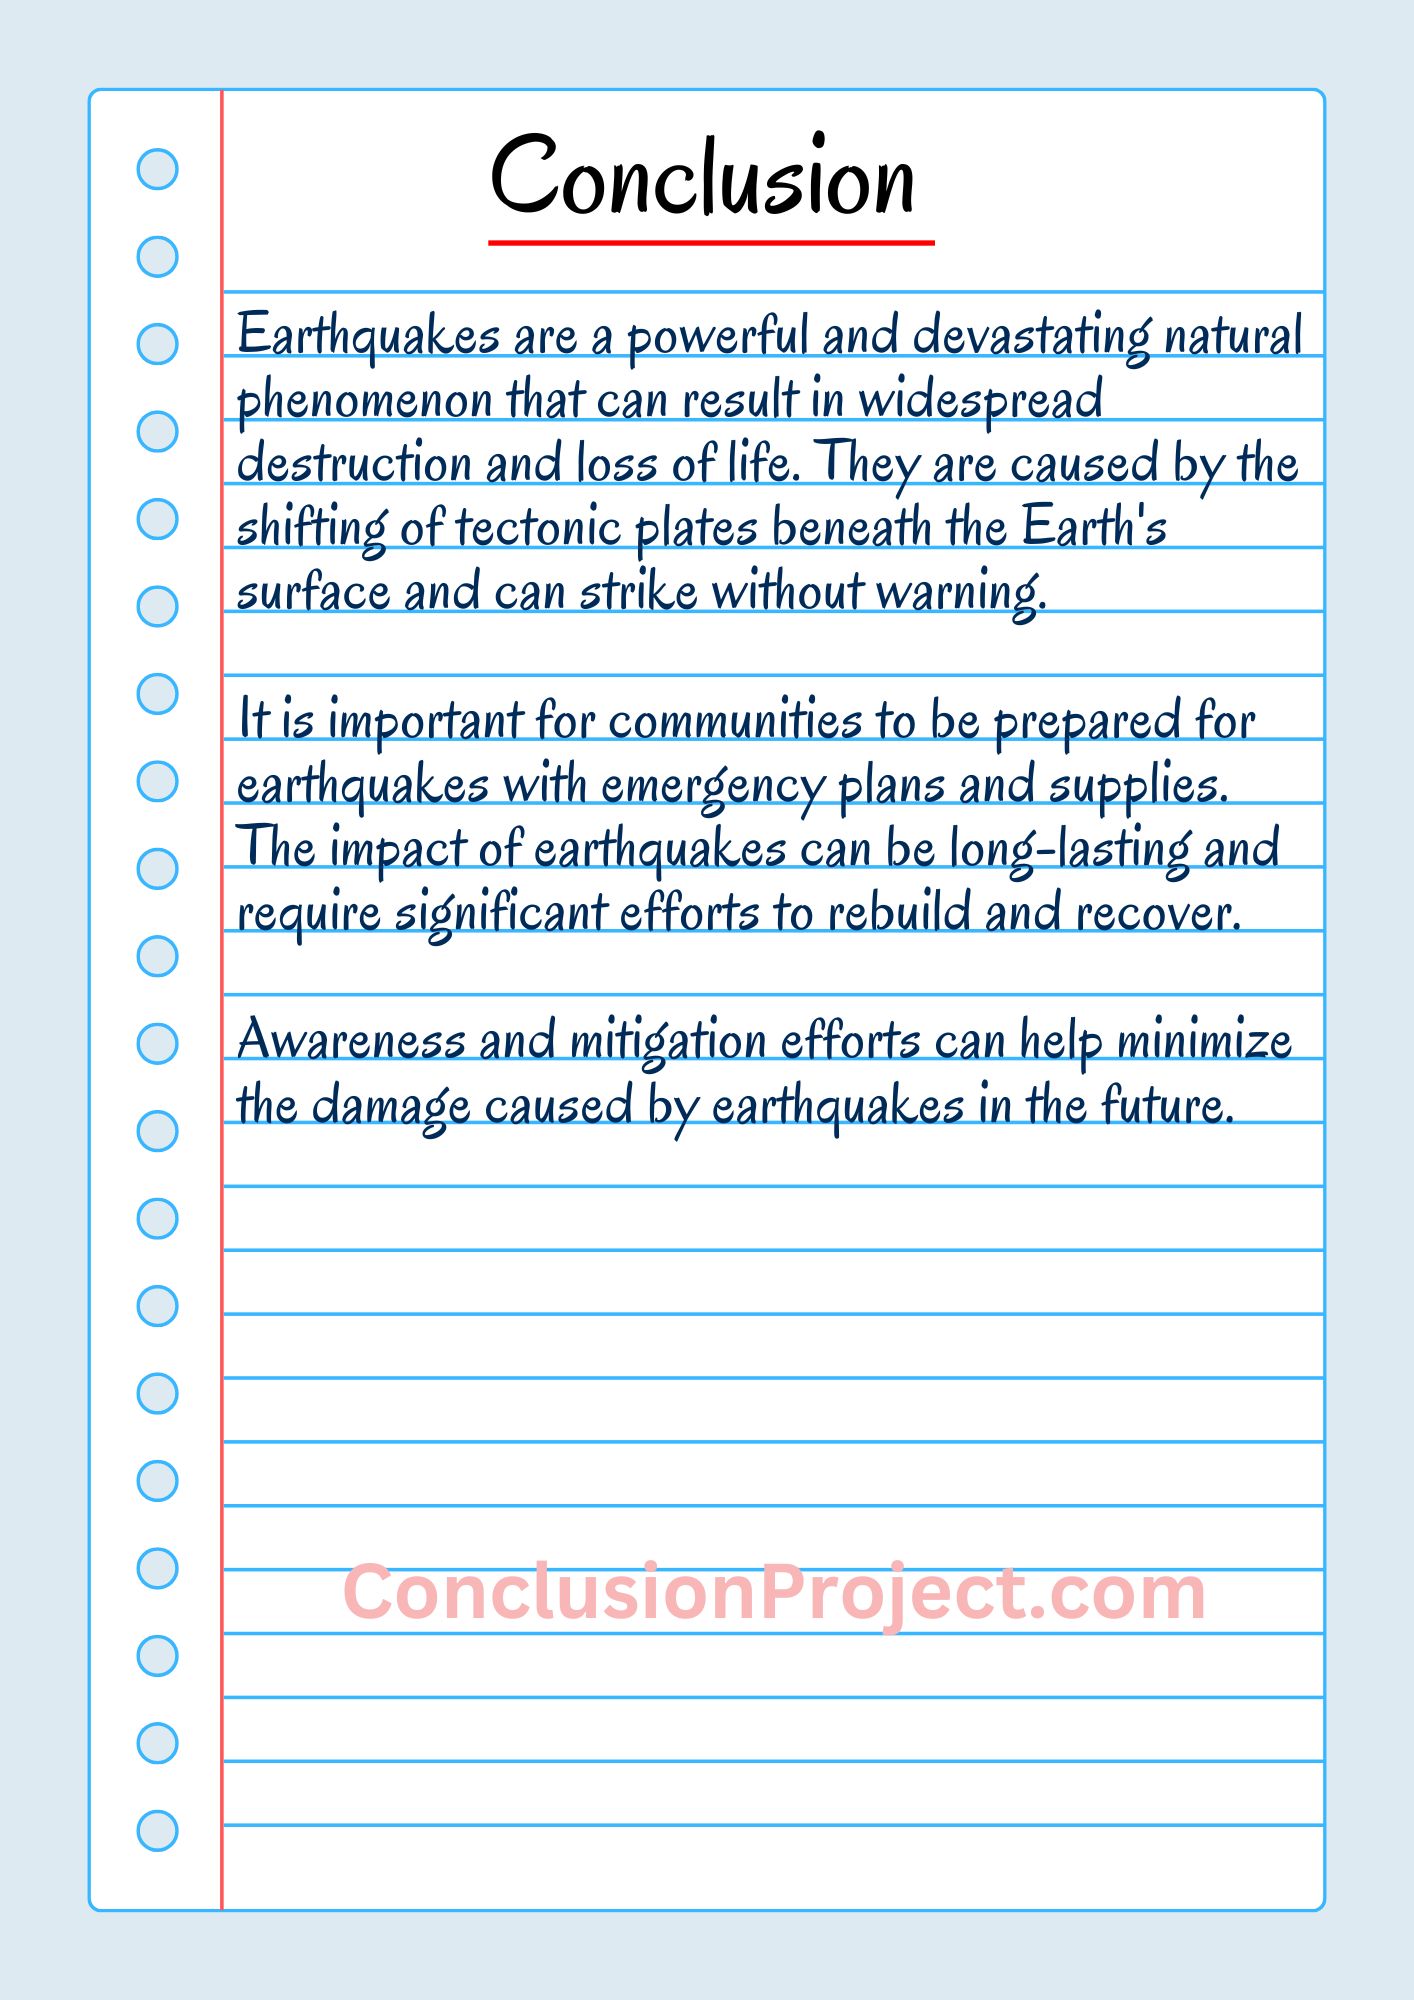 Conclusion of Earthquake for Essay 